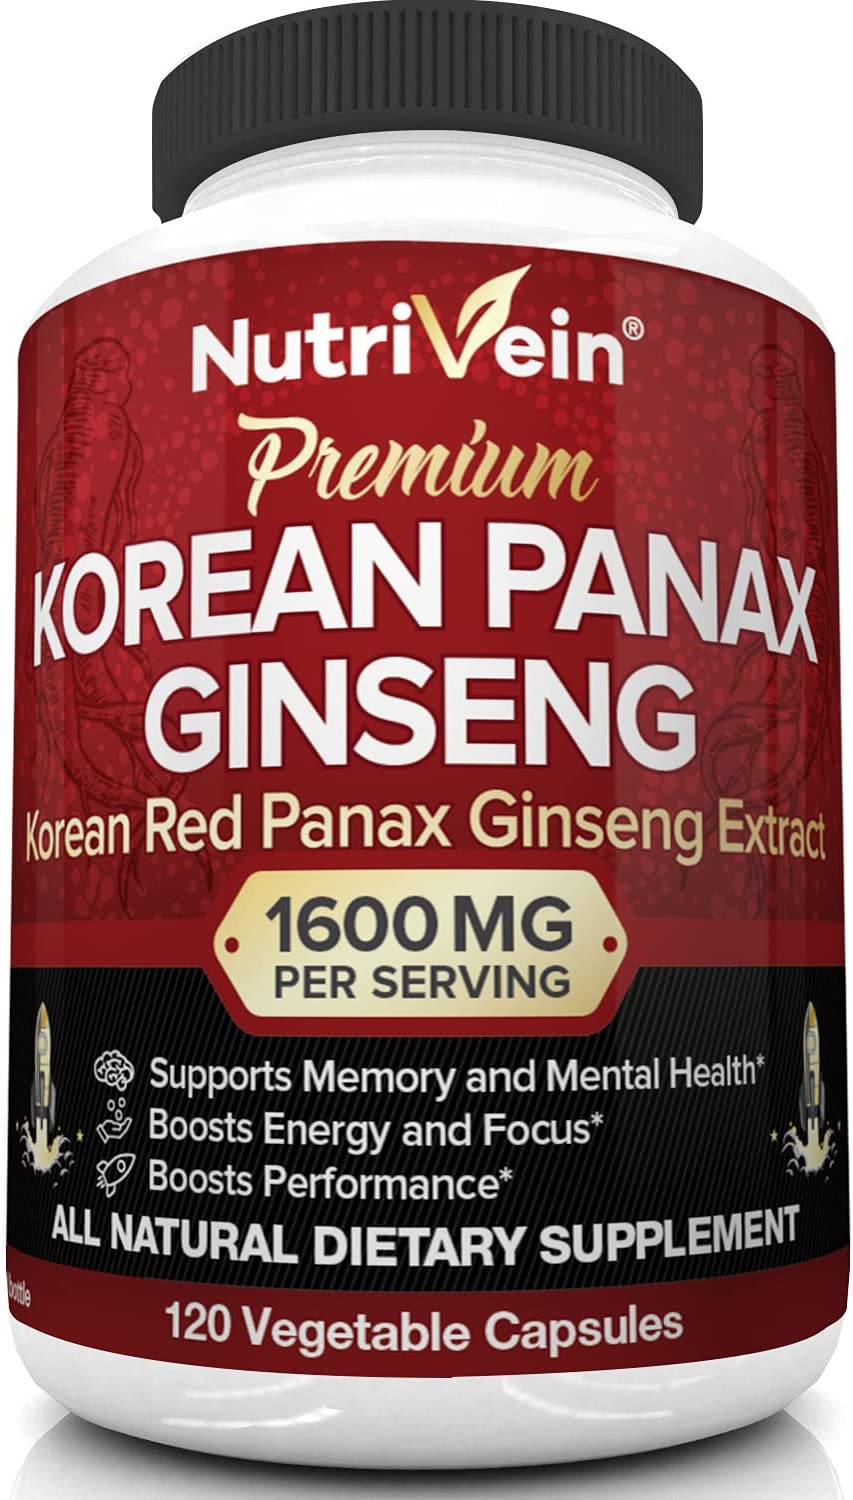 Premium Quality 1600mg Pure Korean Red Panax Ginseng 120 Vegan Capsules - High Strength 5% Ginsenosides - Ginseng Root Extract Powder for Energy, Potency, Strength, Vigor and Focus for Men and Women